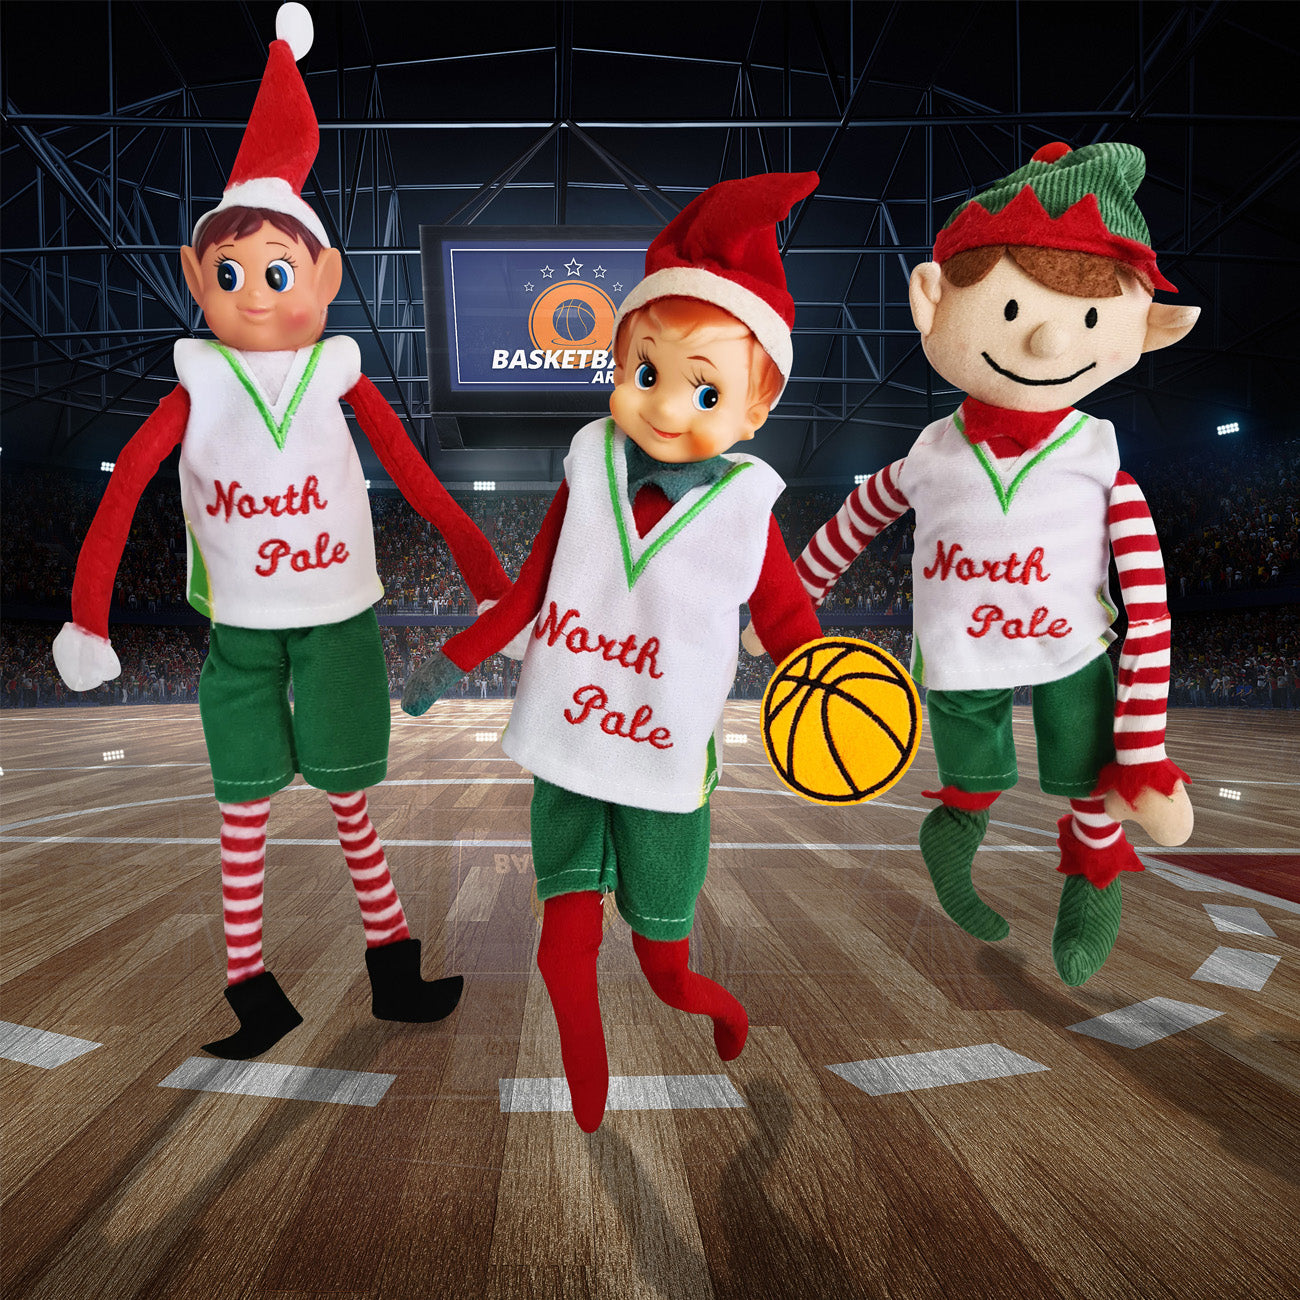 Elves dressed in basketball uniforms playing a game with a miniature basketball